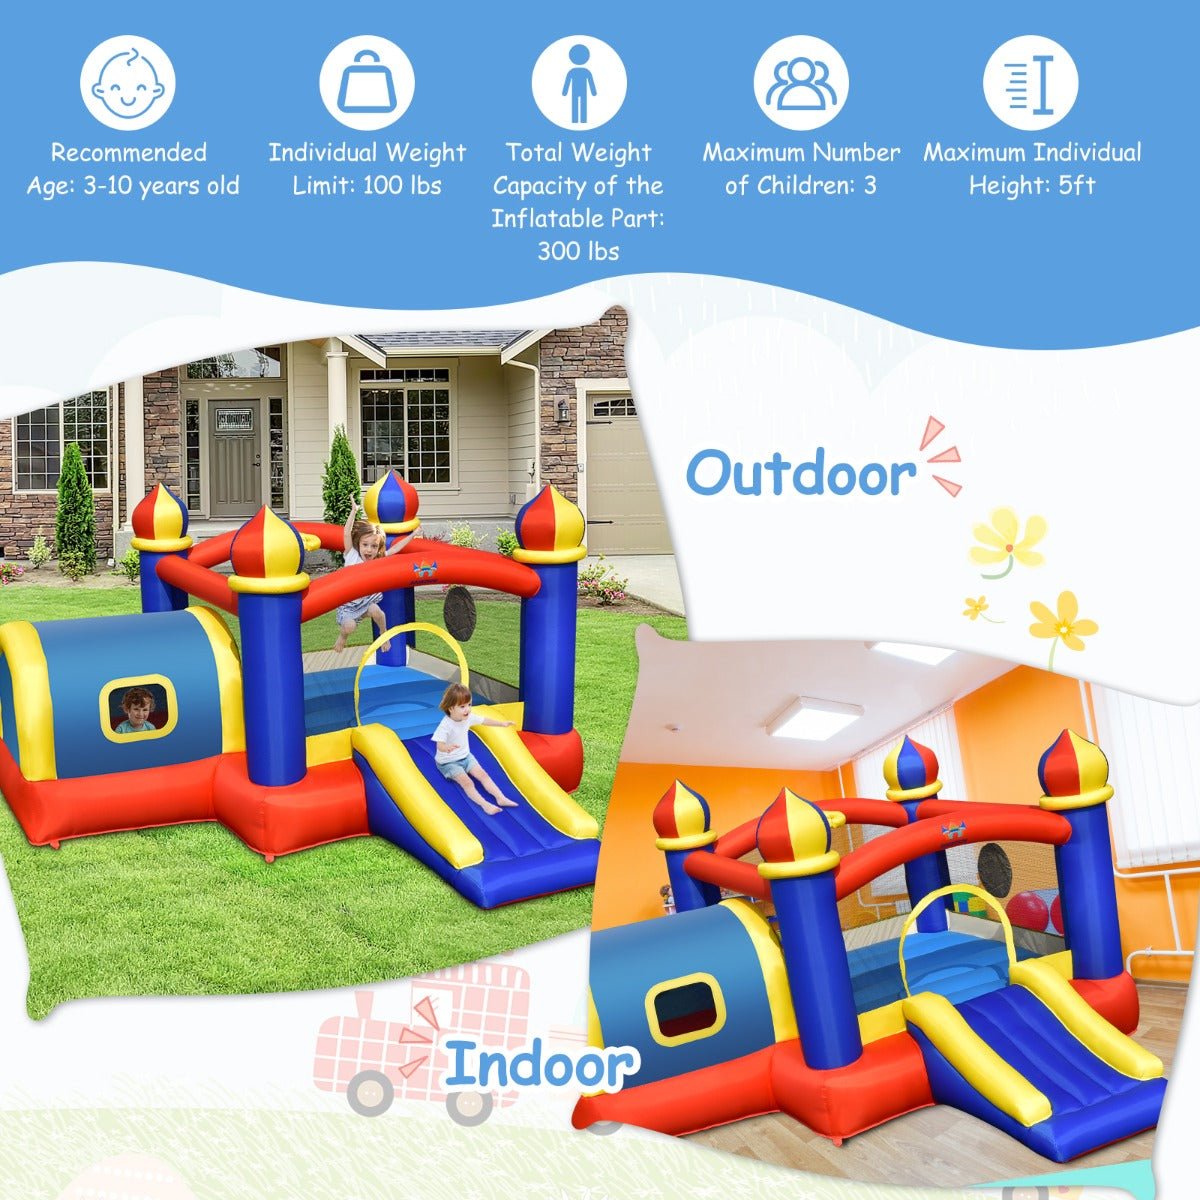 Inflatable Play Center for Kids - 5-in-1 Bounce House with Slide